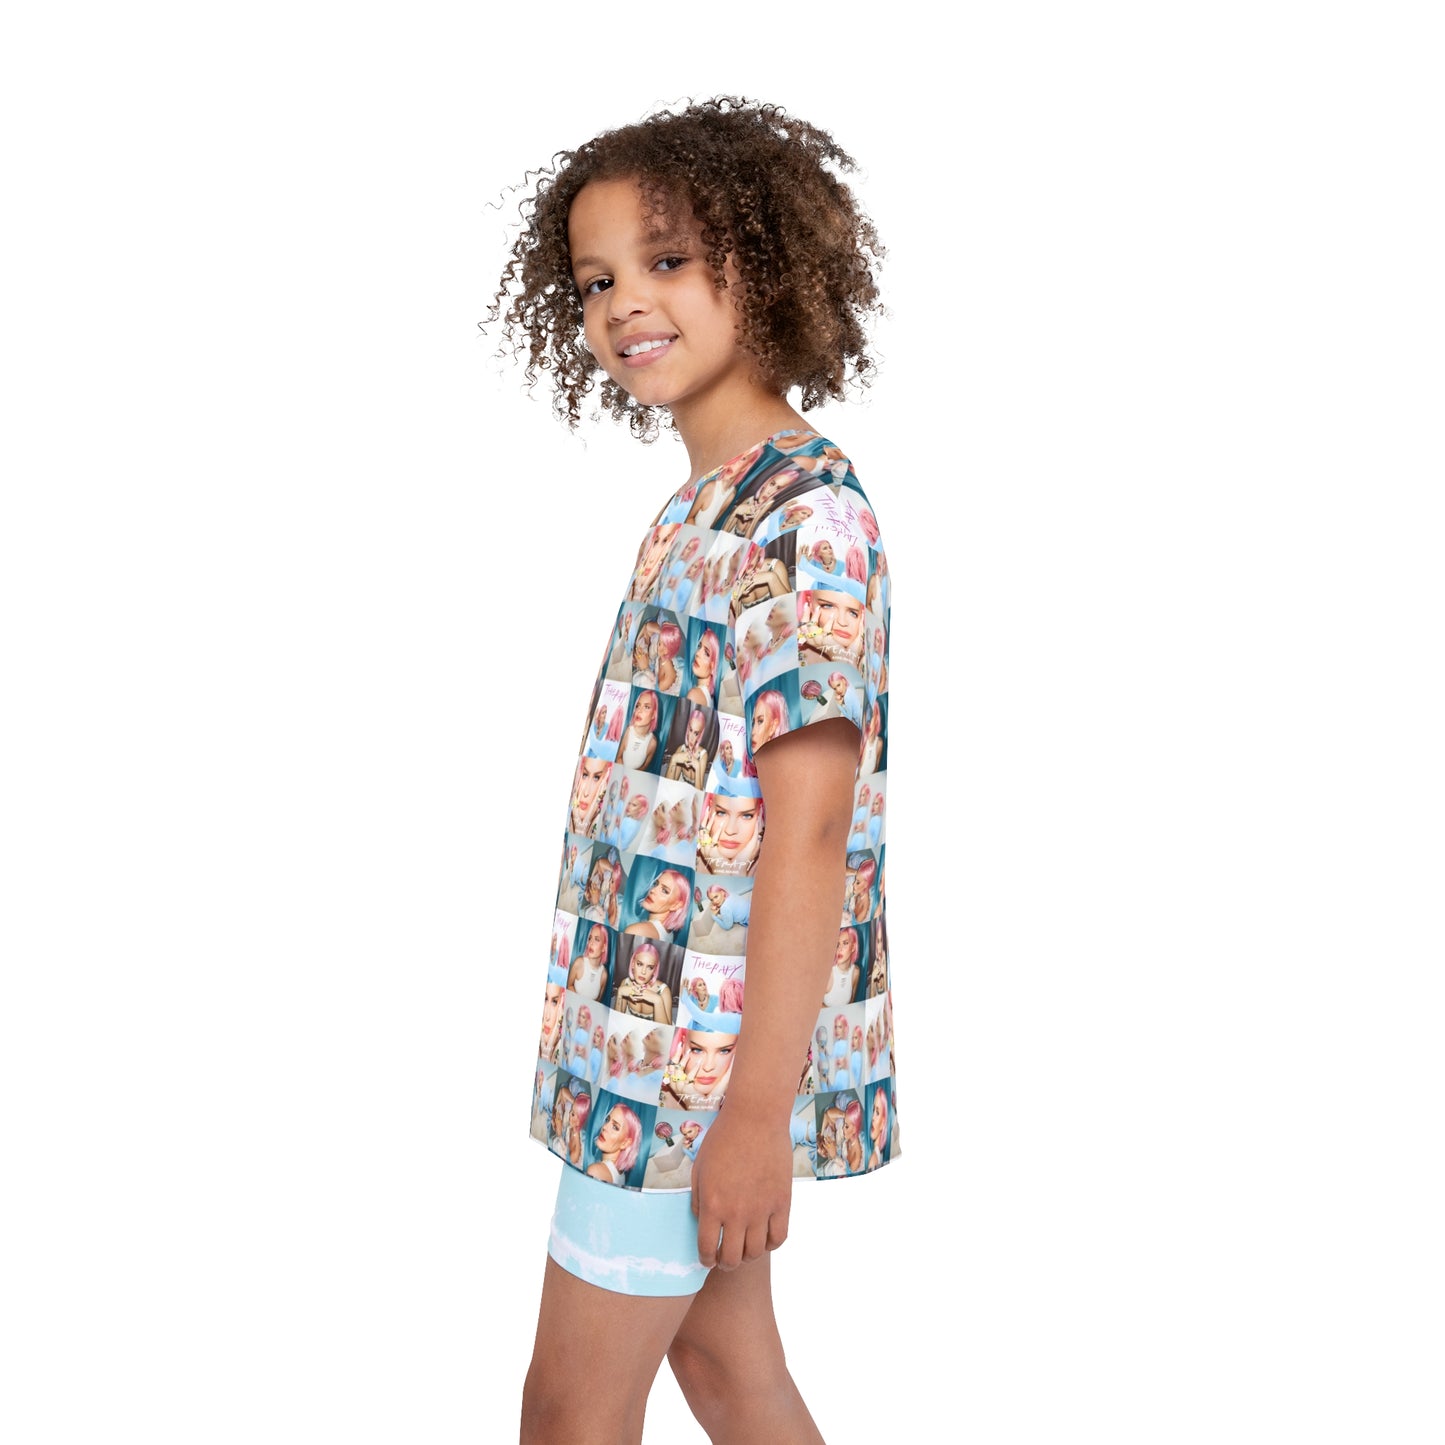 Anne Marie Therapy Mosaic Kids Sports Jersey